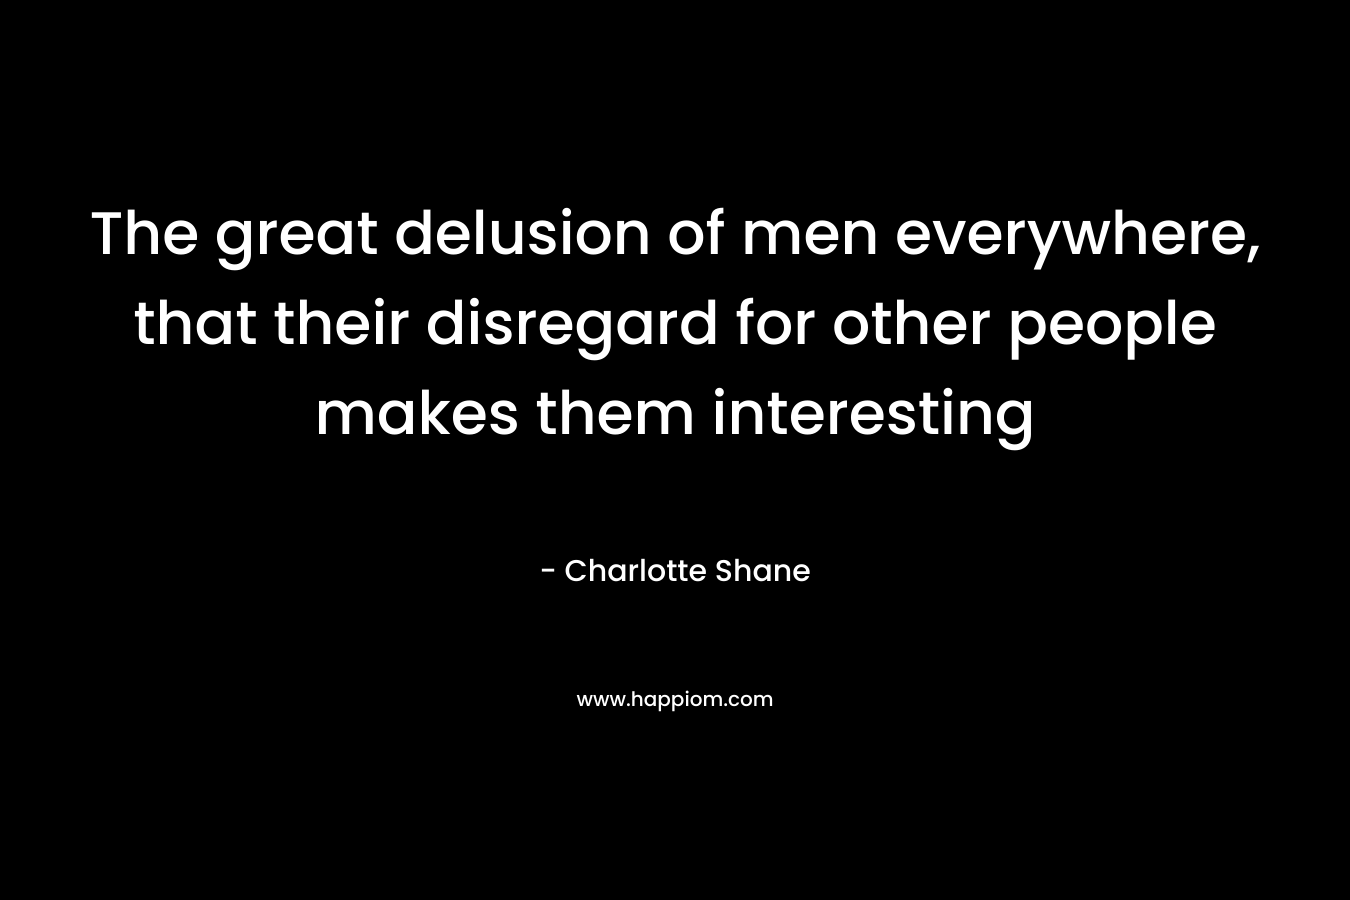 The great delusion of men everywhere, that their disregard for other people makes them interesting